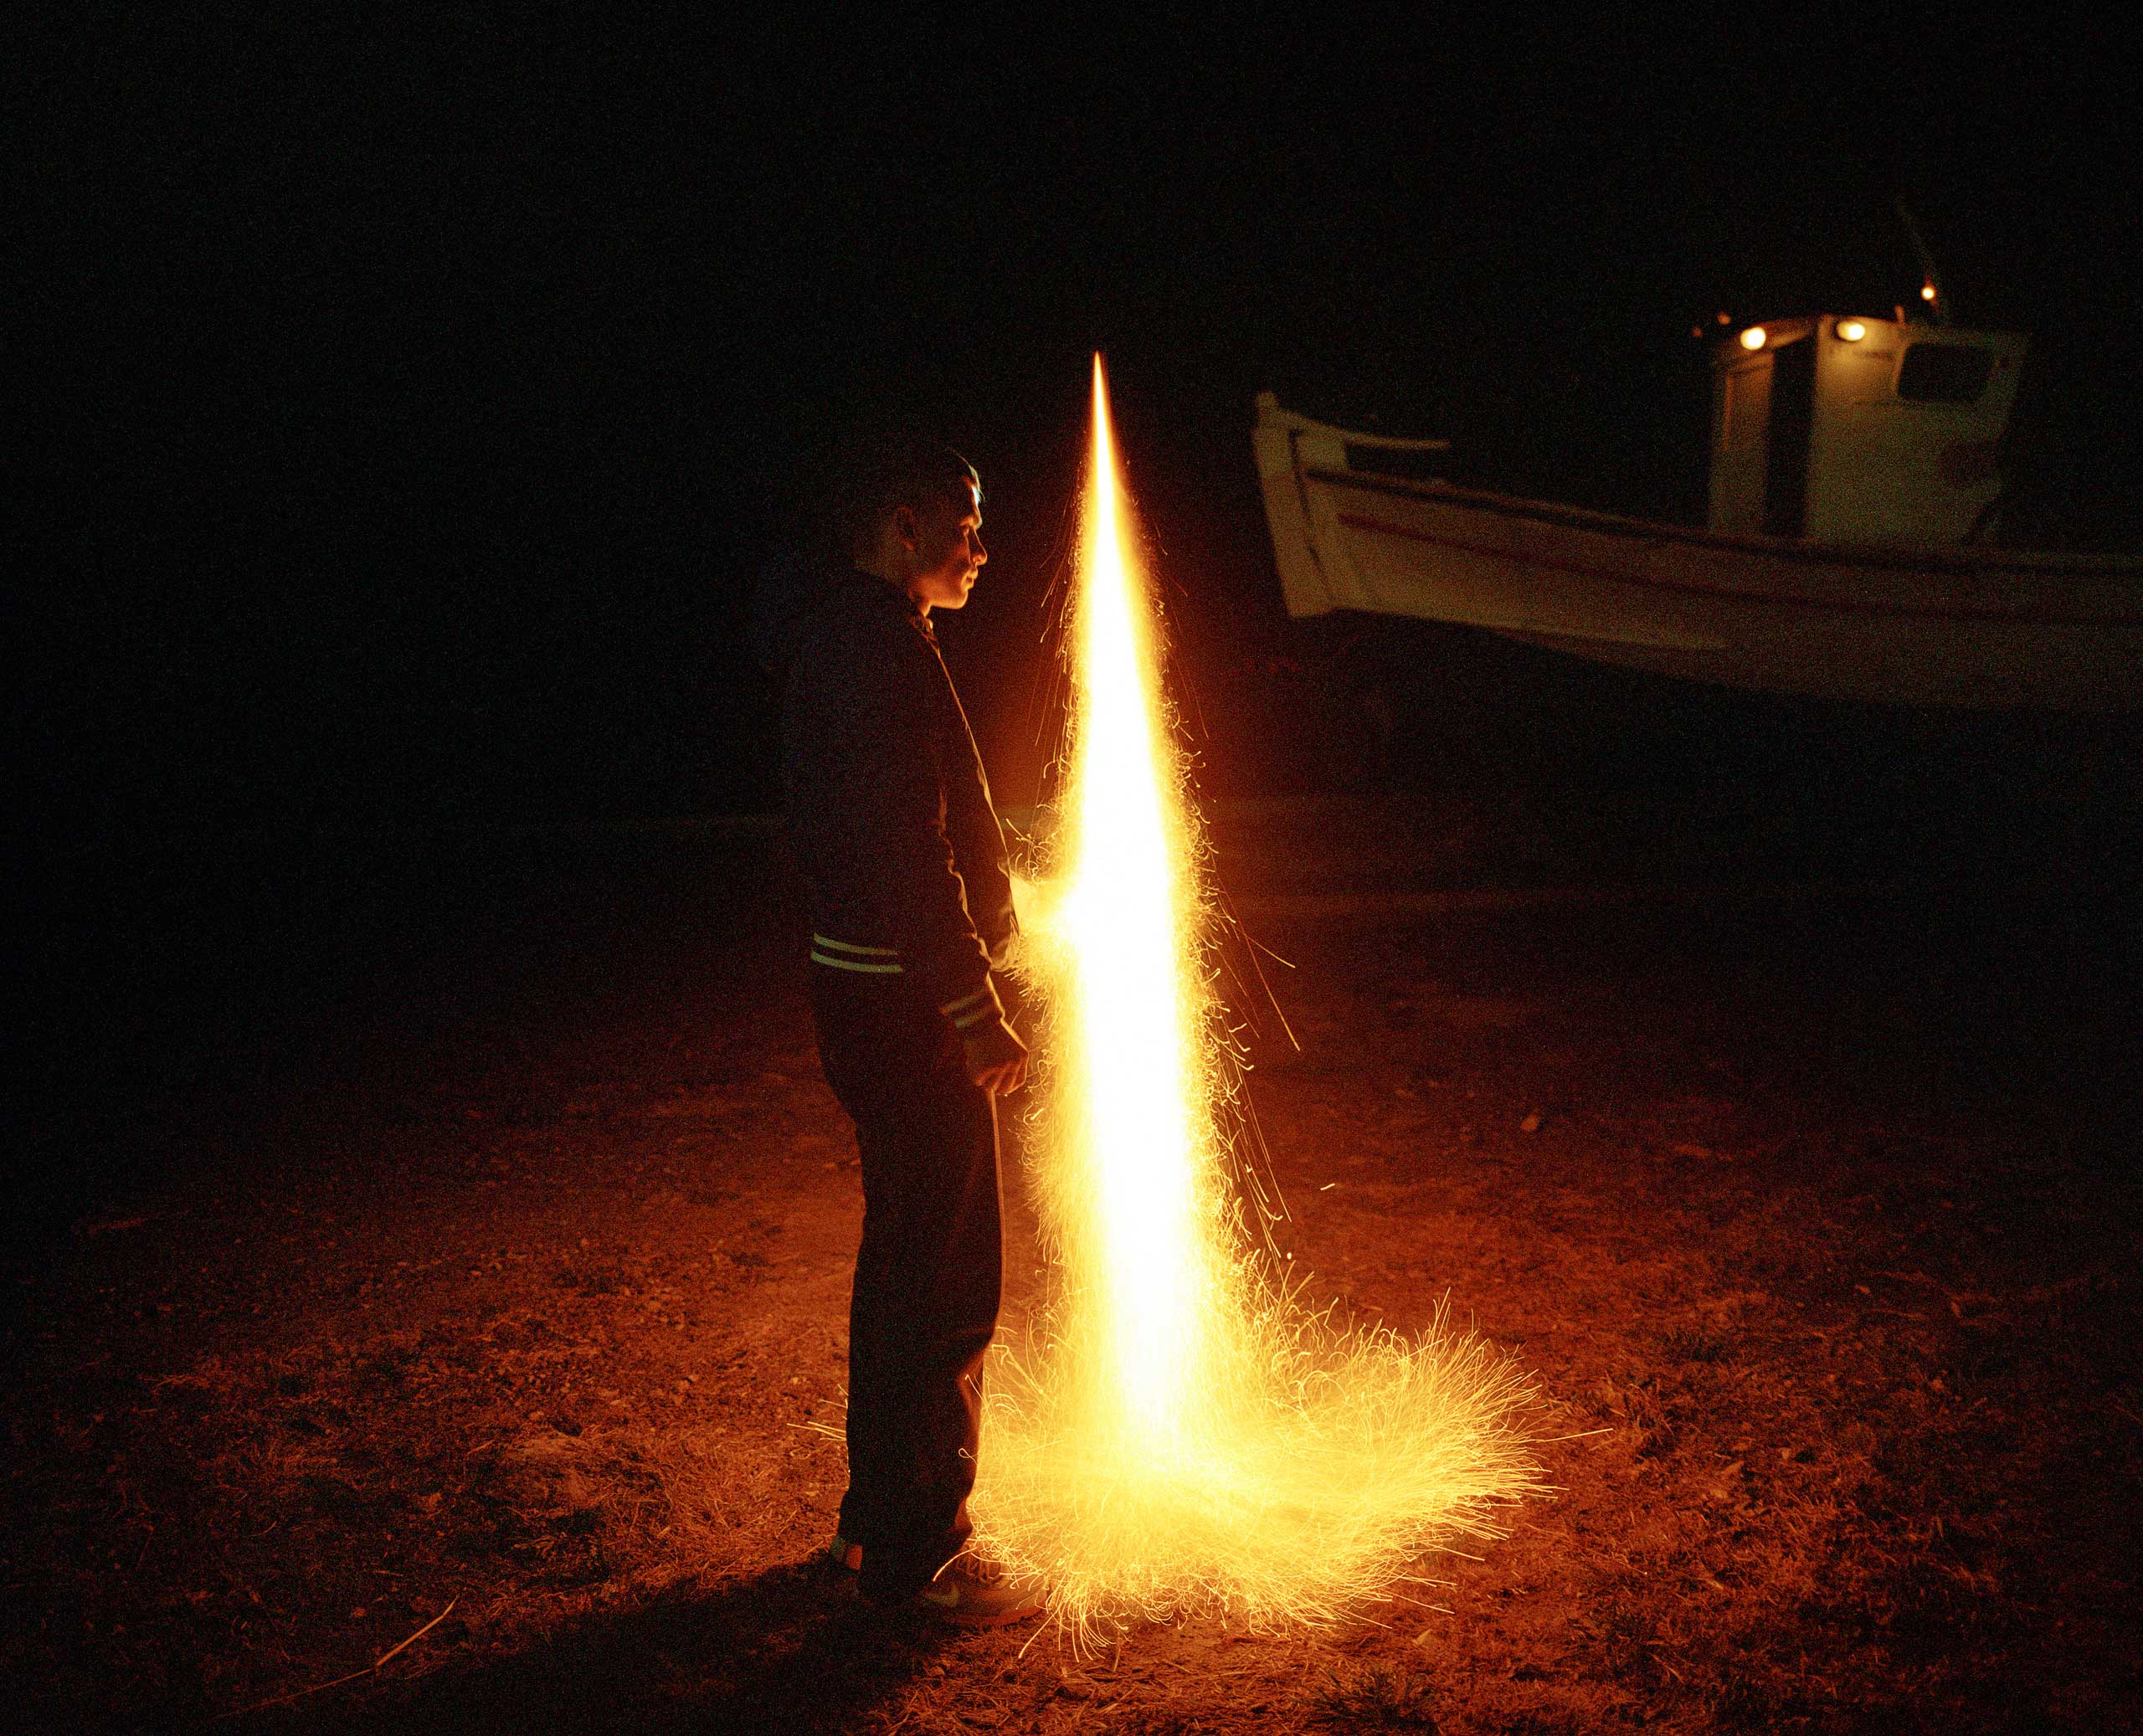 A rocket is lit at a small fishing port in Vrontados.